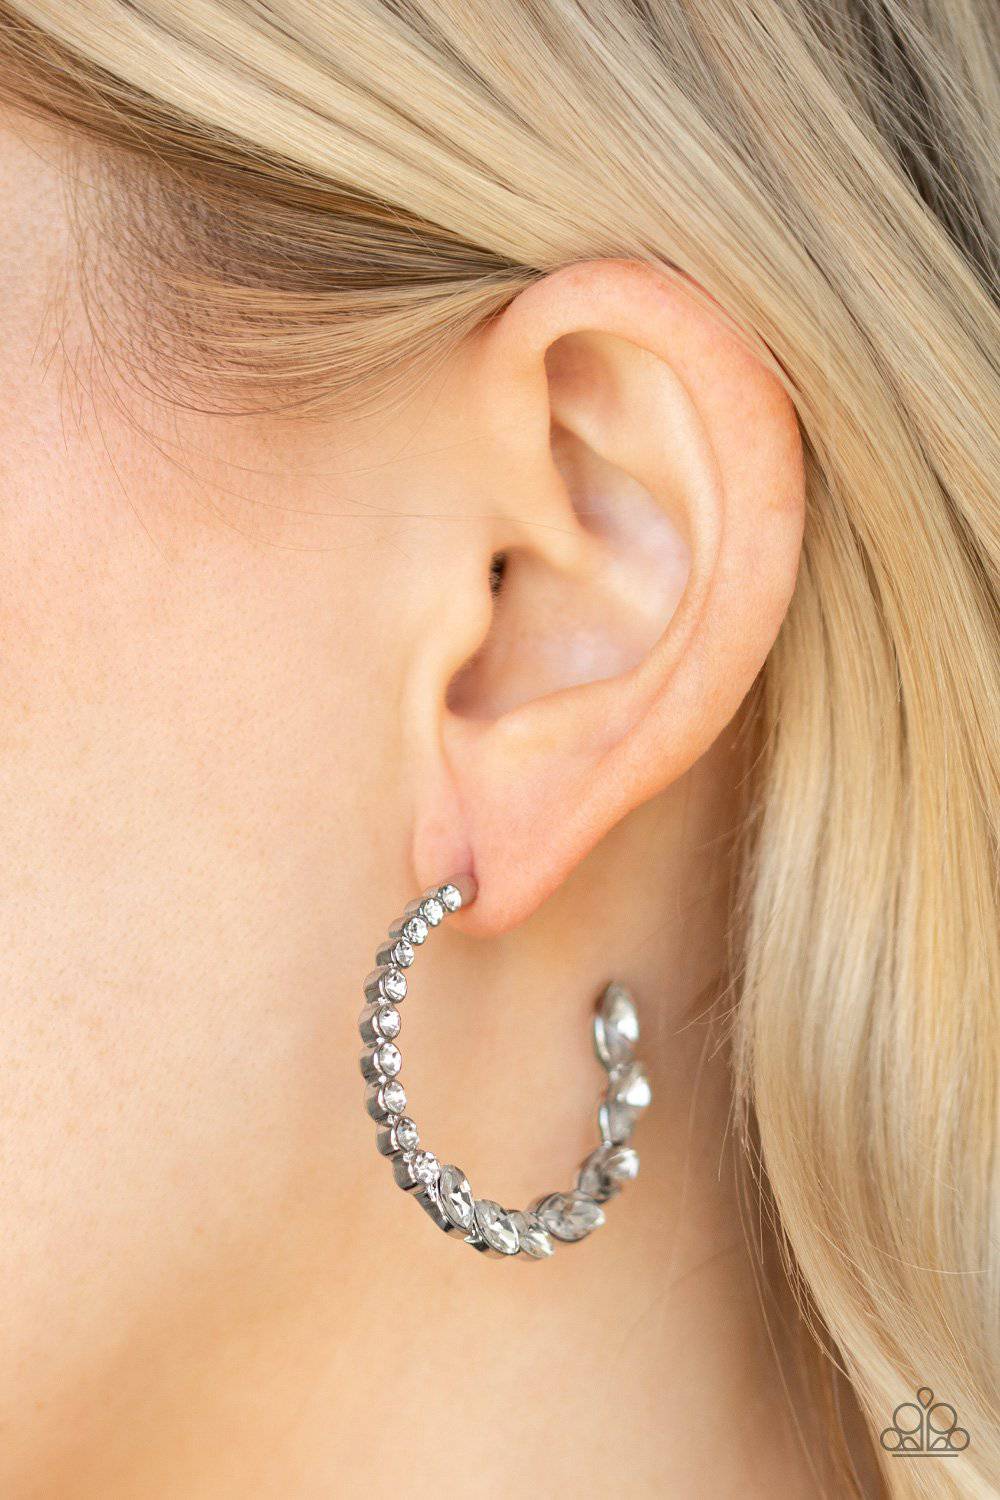 D249 - Prime Time Princess Hoop Earring by Paparazzi Accessories on Fancy5Fashion.com